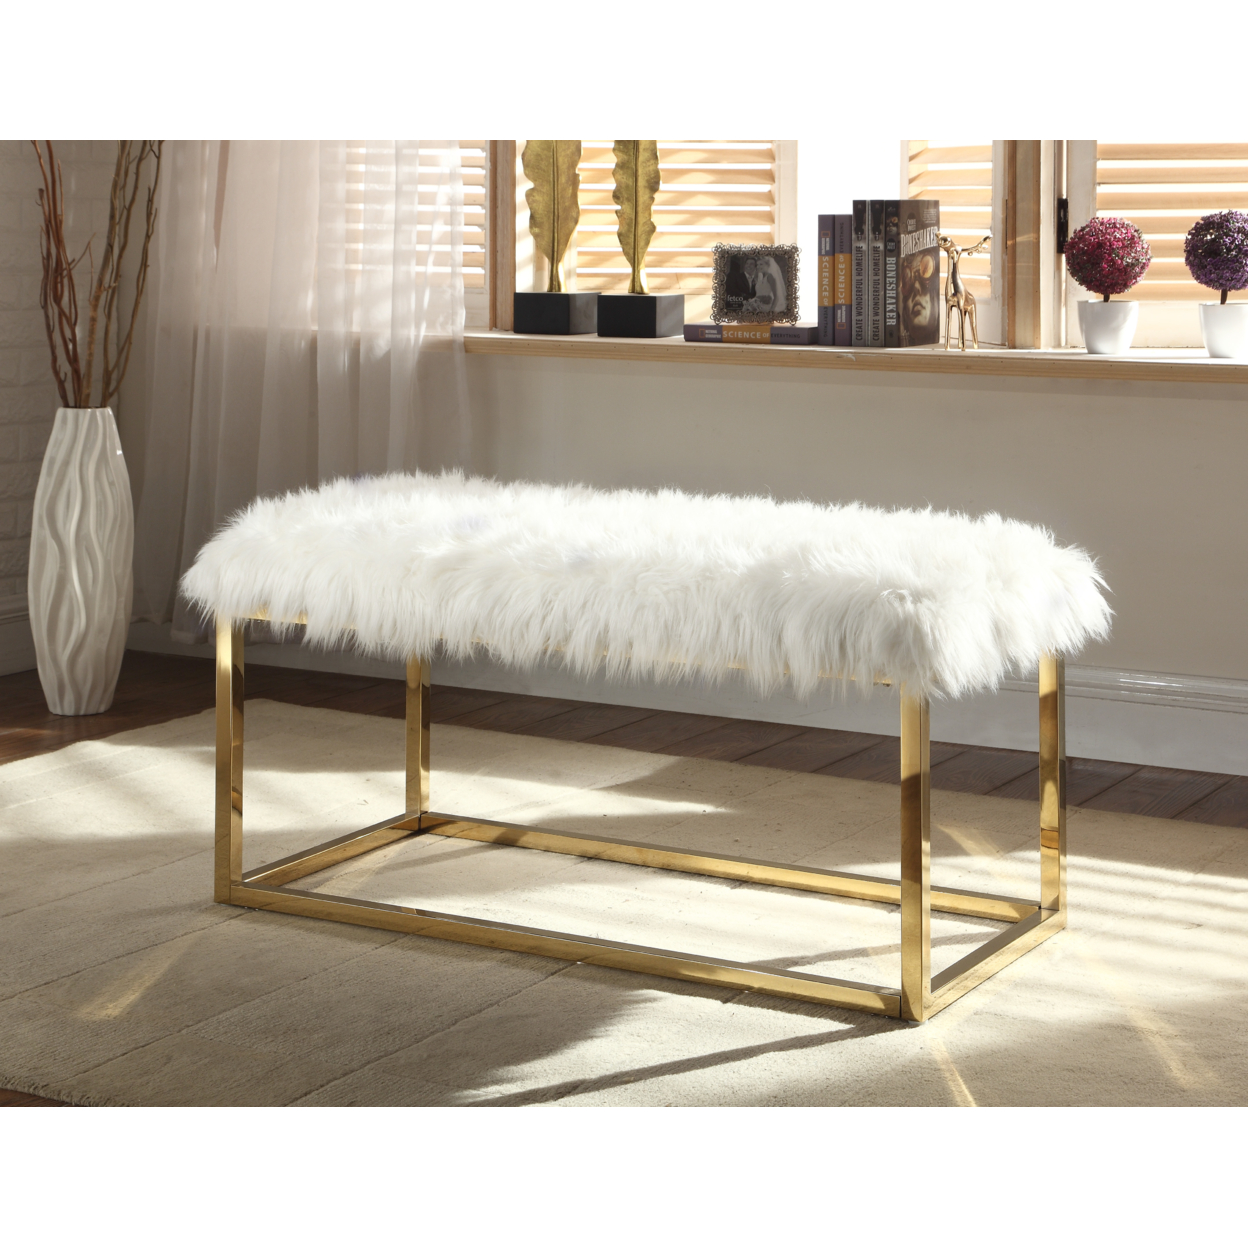 Audrey Bench Ottoman Faux Fur Brass Finished Stainless Steel Metal Frame - Beige